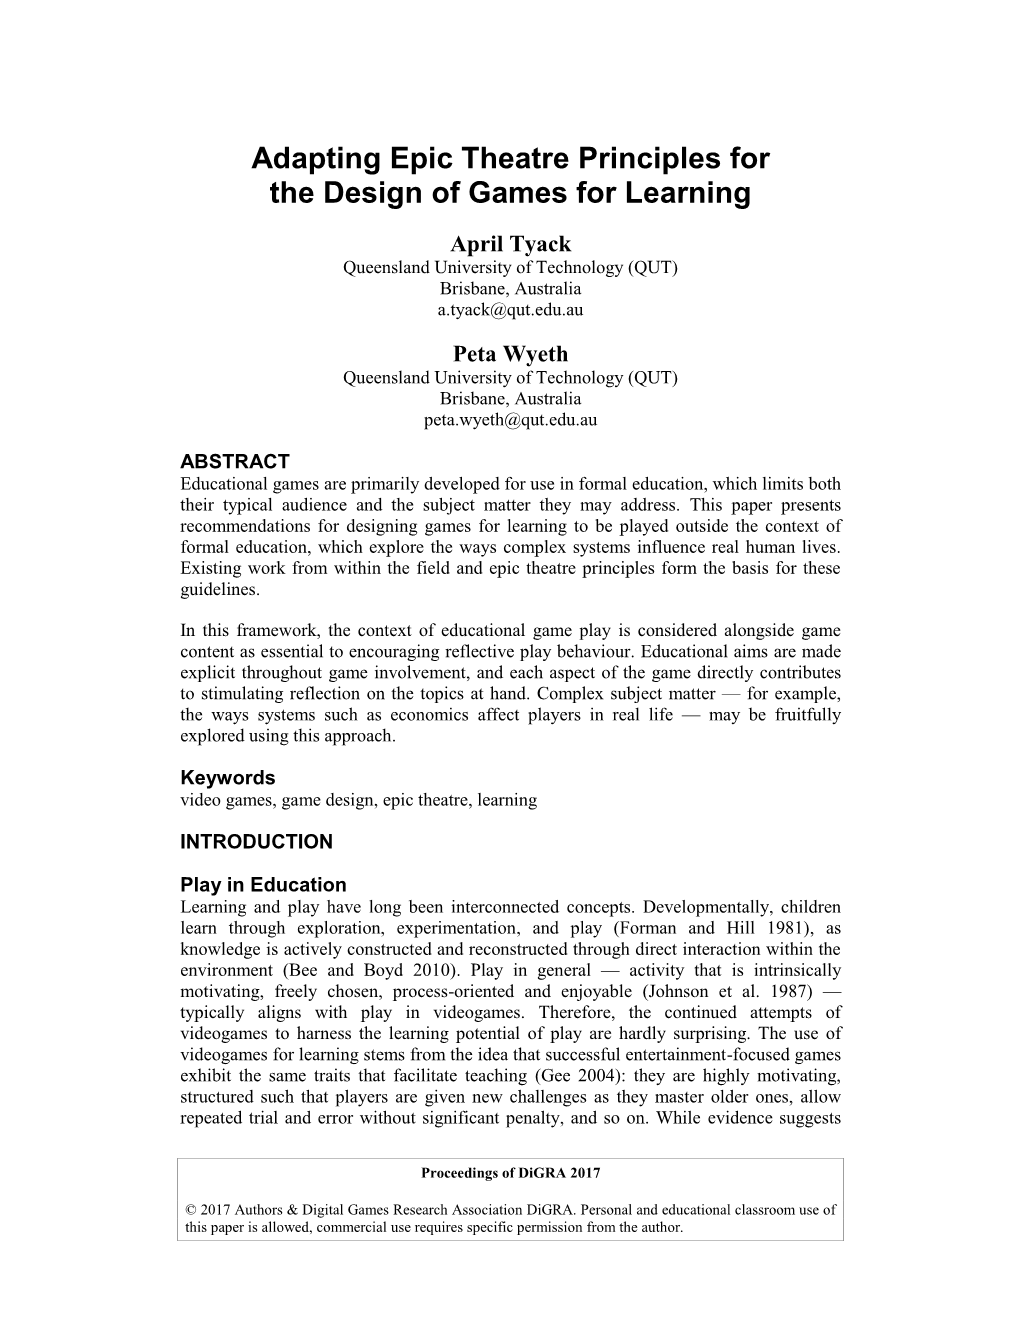 Adapting Epic Theatre Principles for the Design of Games for Learning